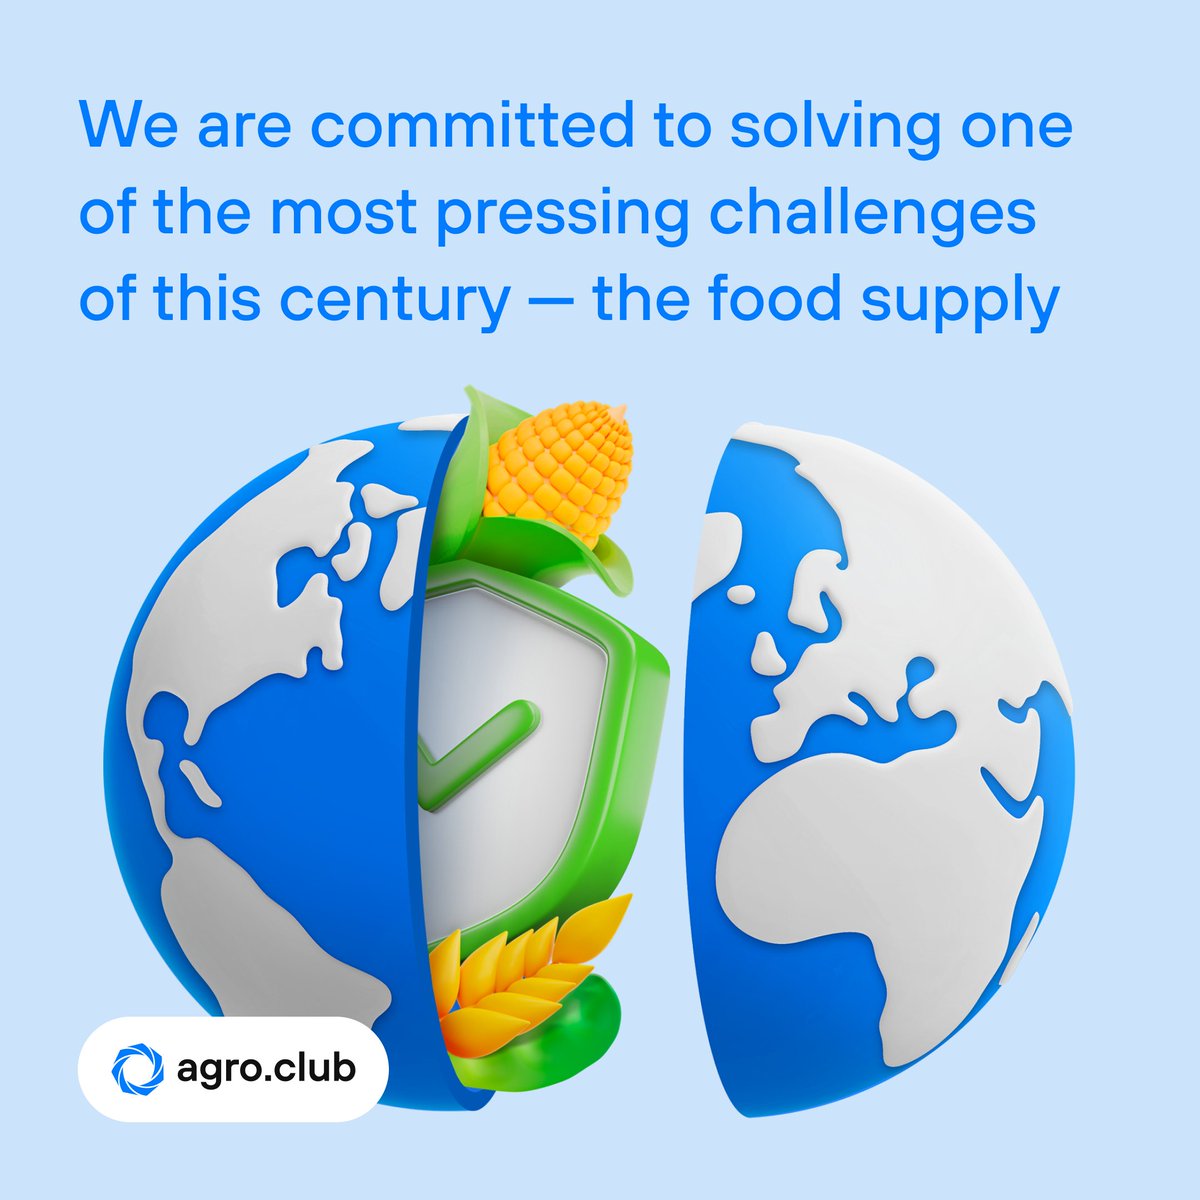 While the prevalence of severe food insecurity at the global level showed a marginal decline from 11.7% in 2021 to 11.3% in 2022, it remains far above pre-pandemic levels, equivalent to 180 million more people compared to 2019.

#AgTech solutions are here to help!

#graintrade